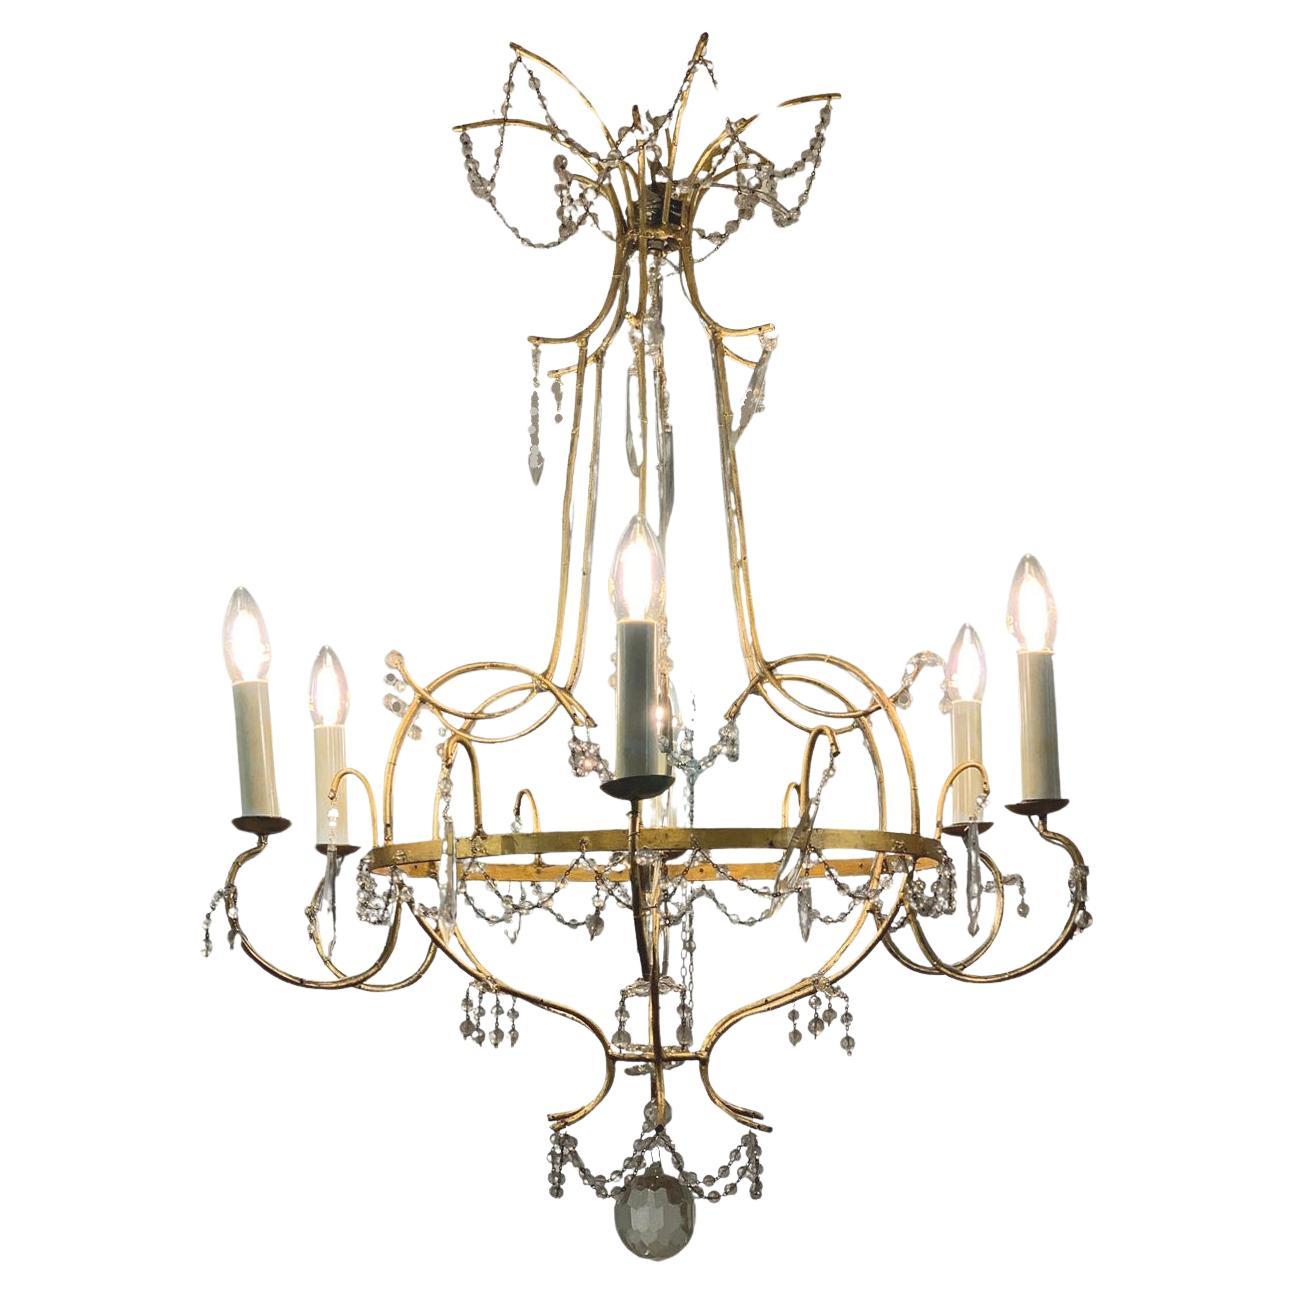 MID 18th CENTURY MARIA TERESA CHANDELIER For Sale